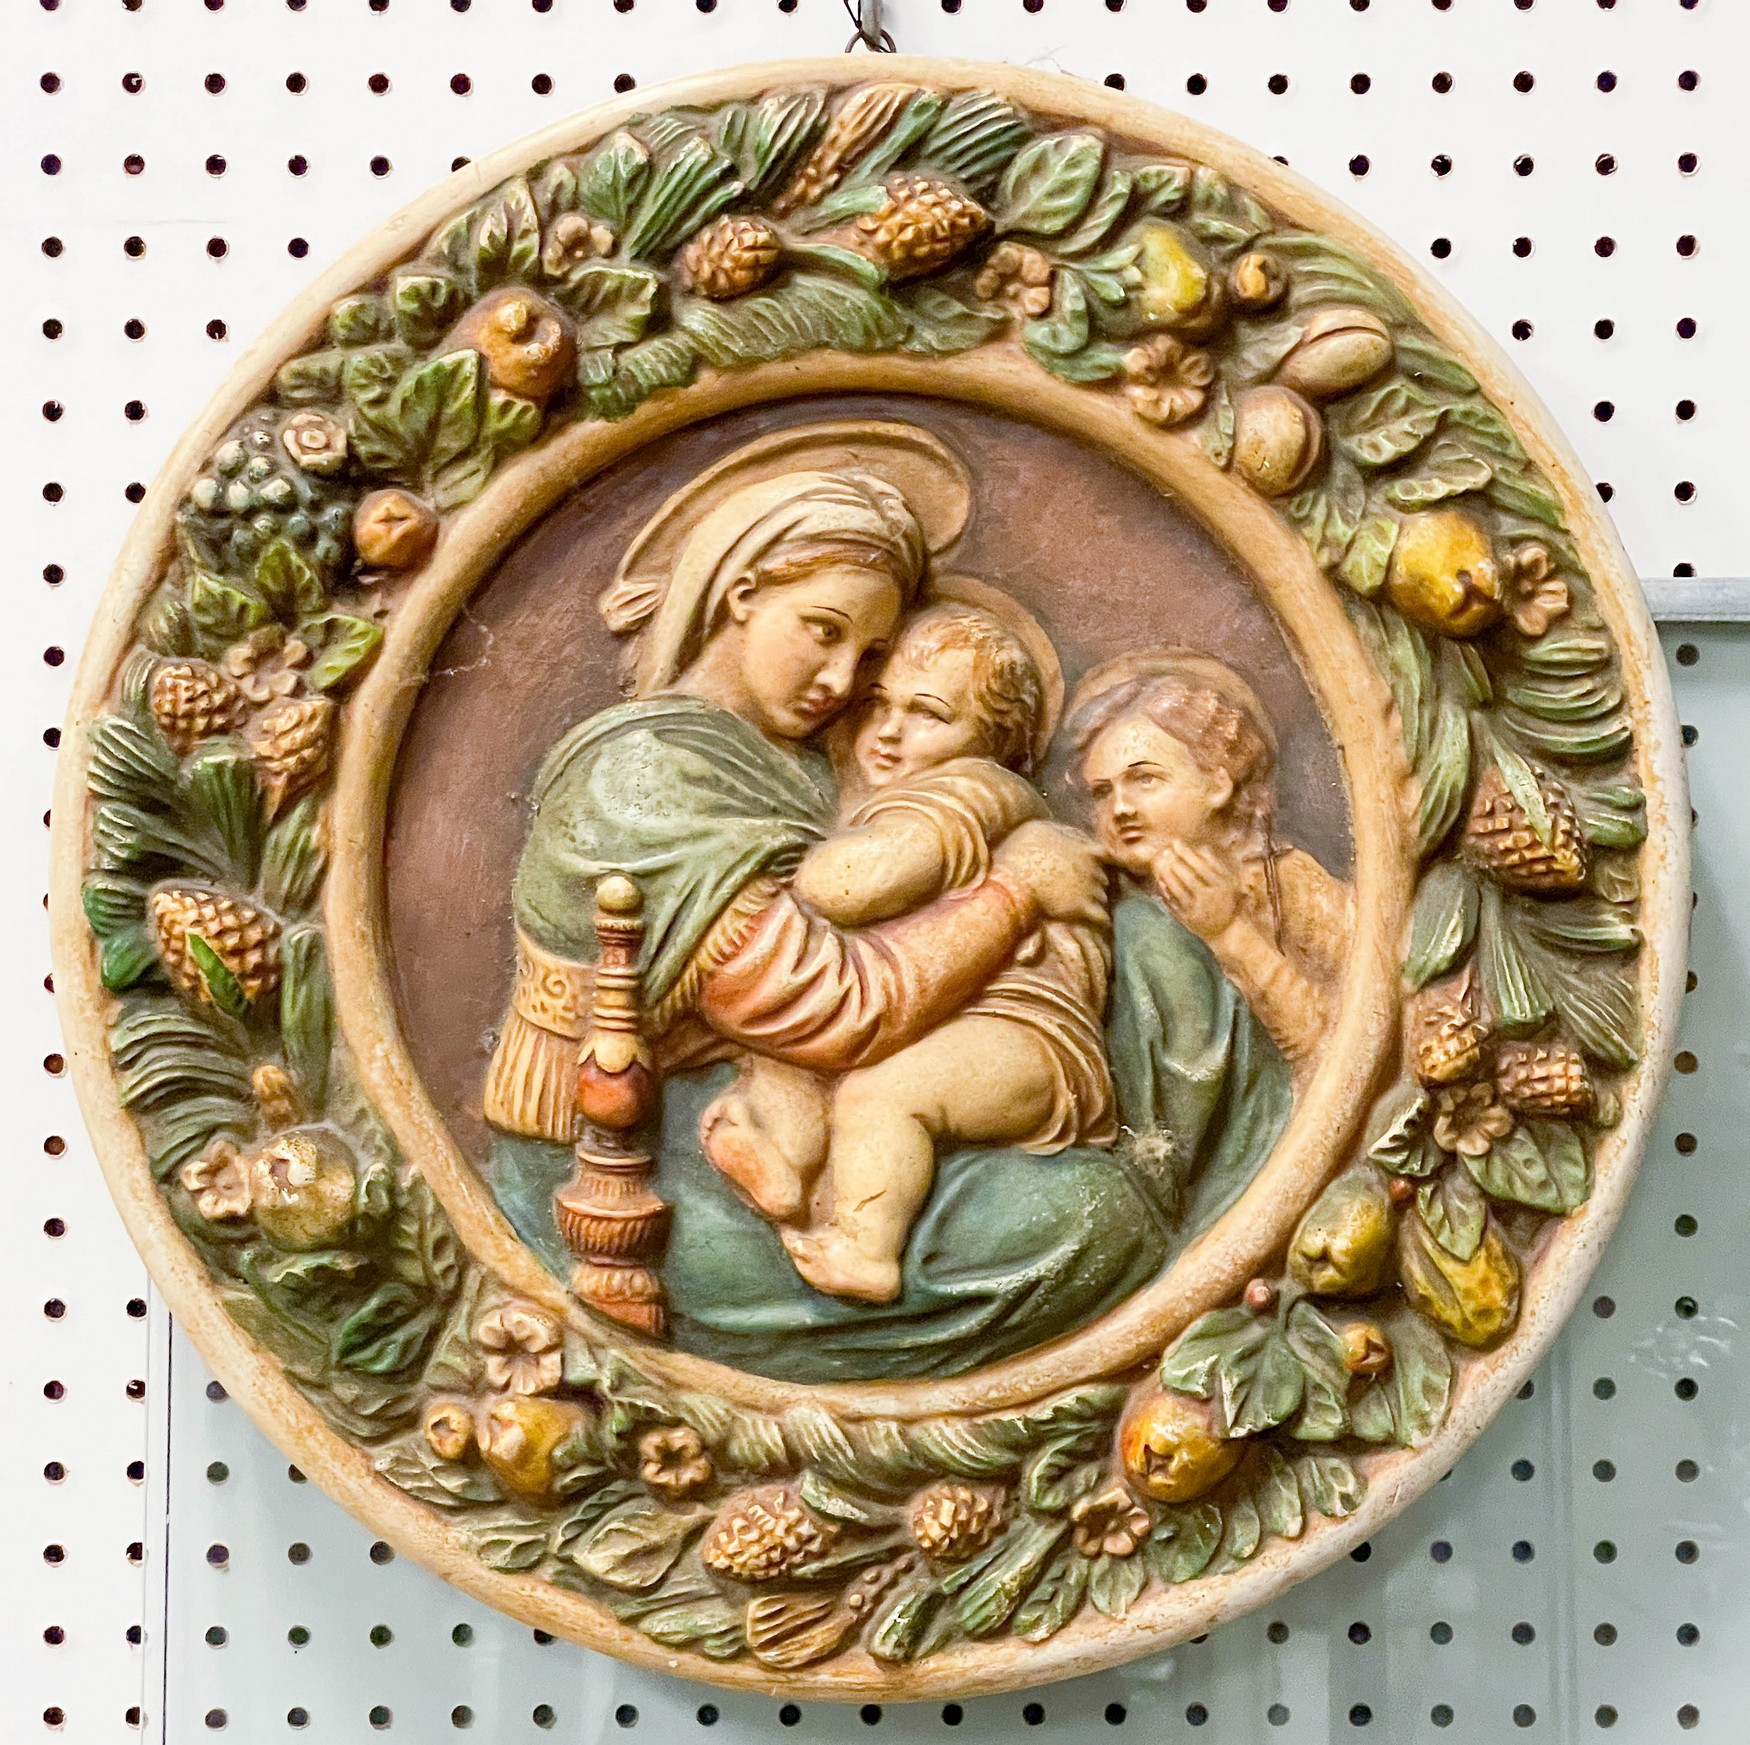 Madonna & child relief pottery